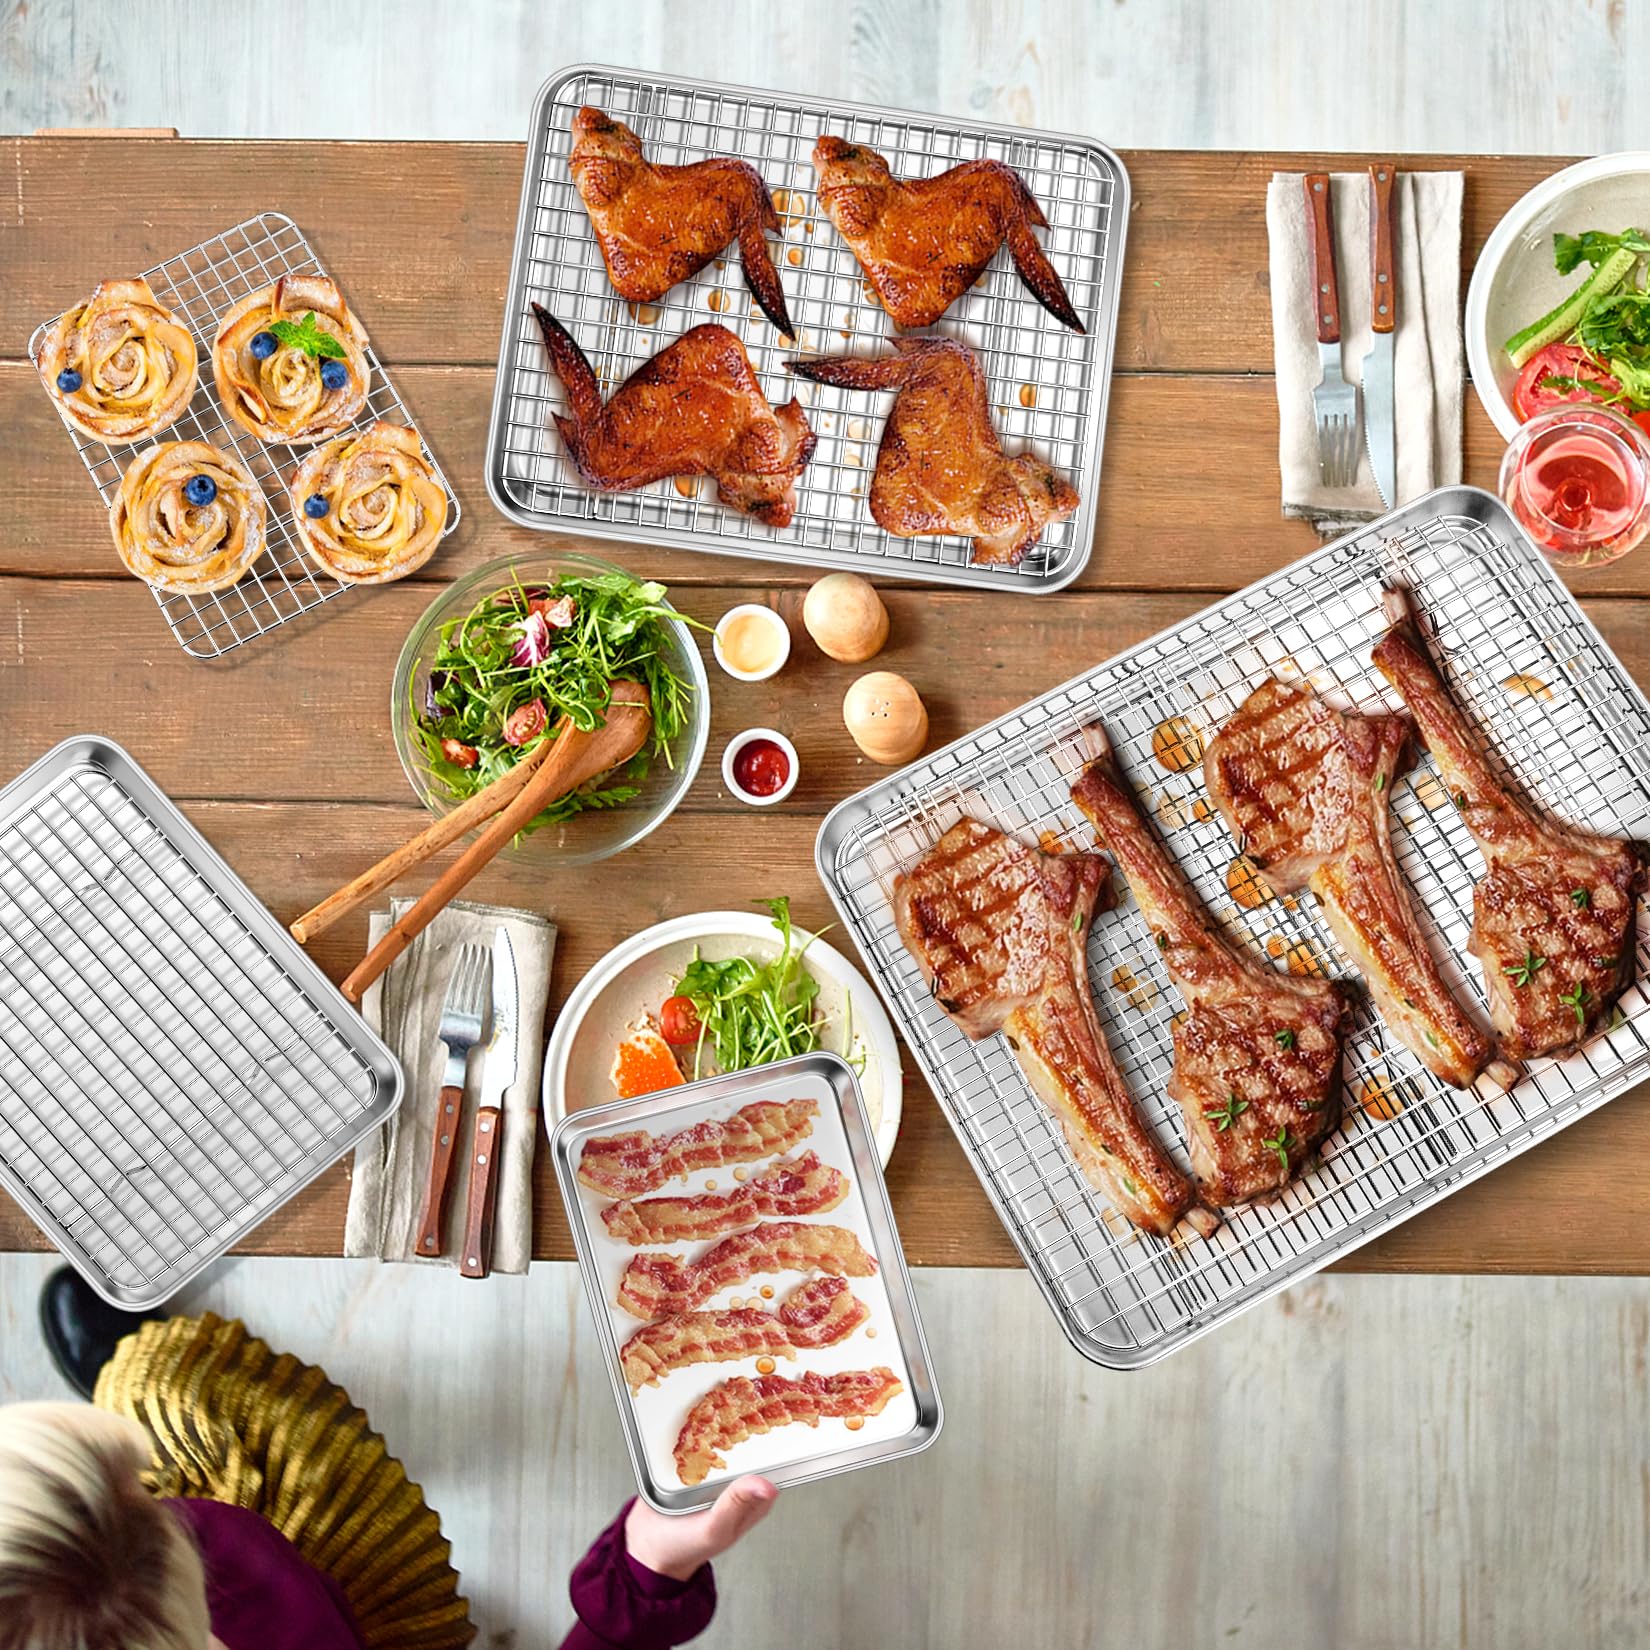 P&P CHEF Baking Sheet and Rack Set, 8 PACK (4 Sheets + 4 Racks), 4 Sizes Stainless Steel Cookie Sheets Baking Pans with Cooling Racks for Cooking & Roasting, Oven & Dishwasher Safe, Healthy & Durable